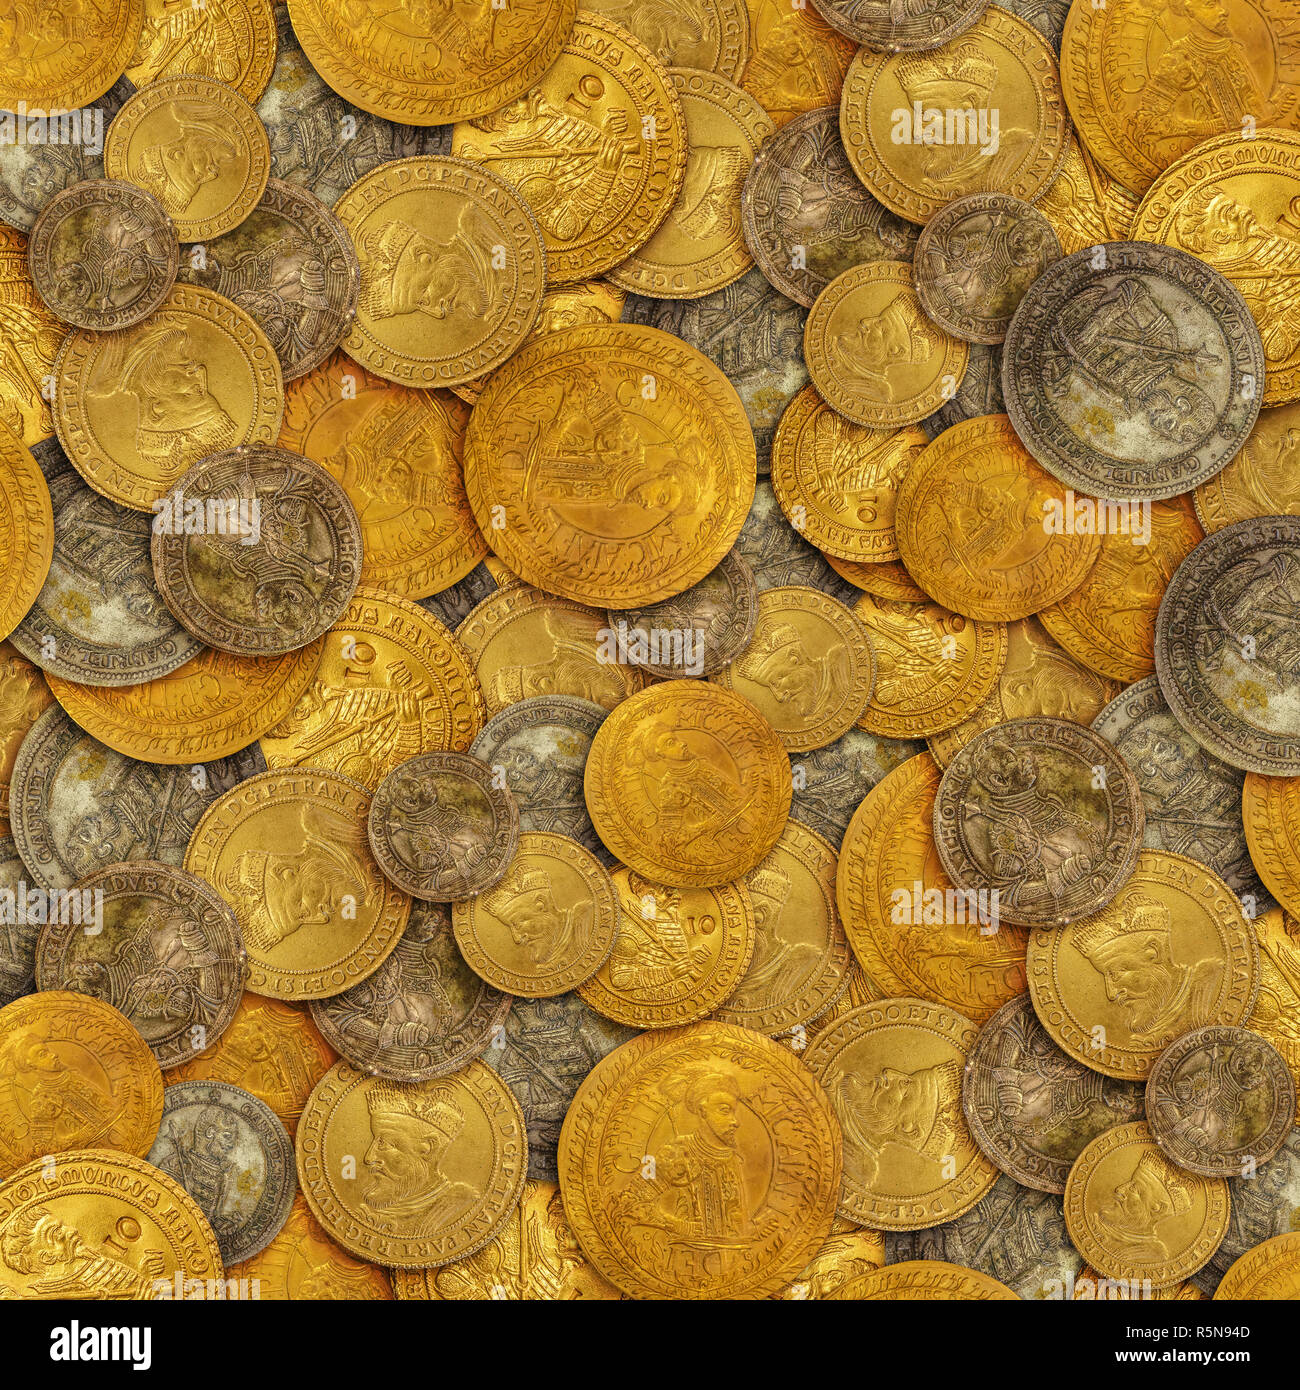 Old gold coins Stock Photo